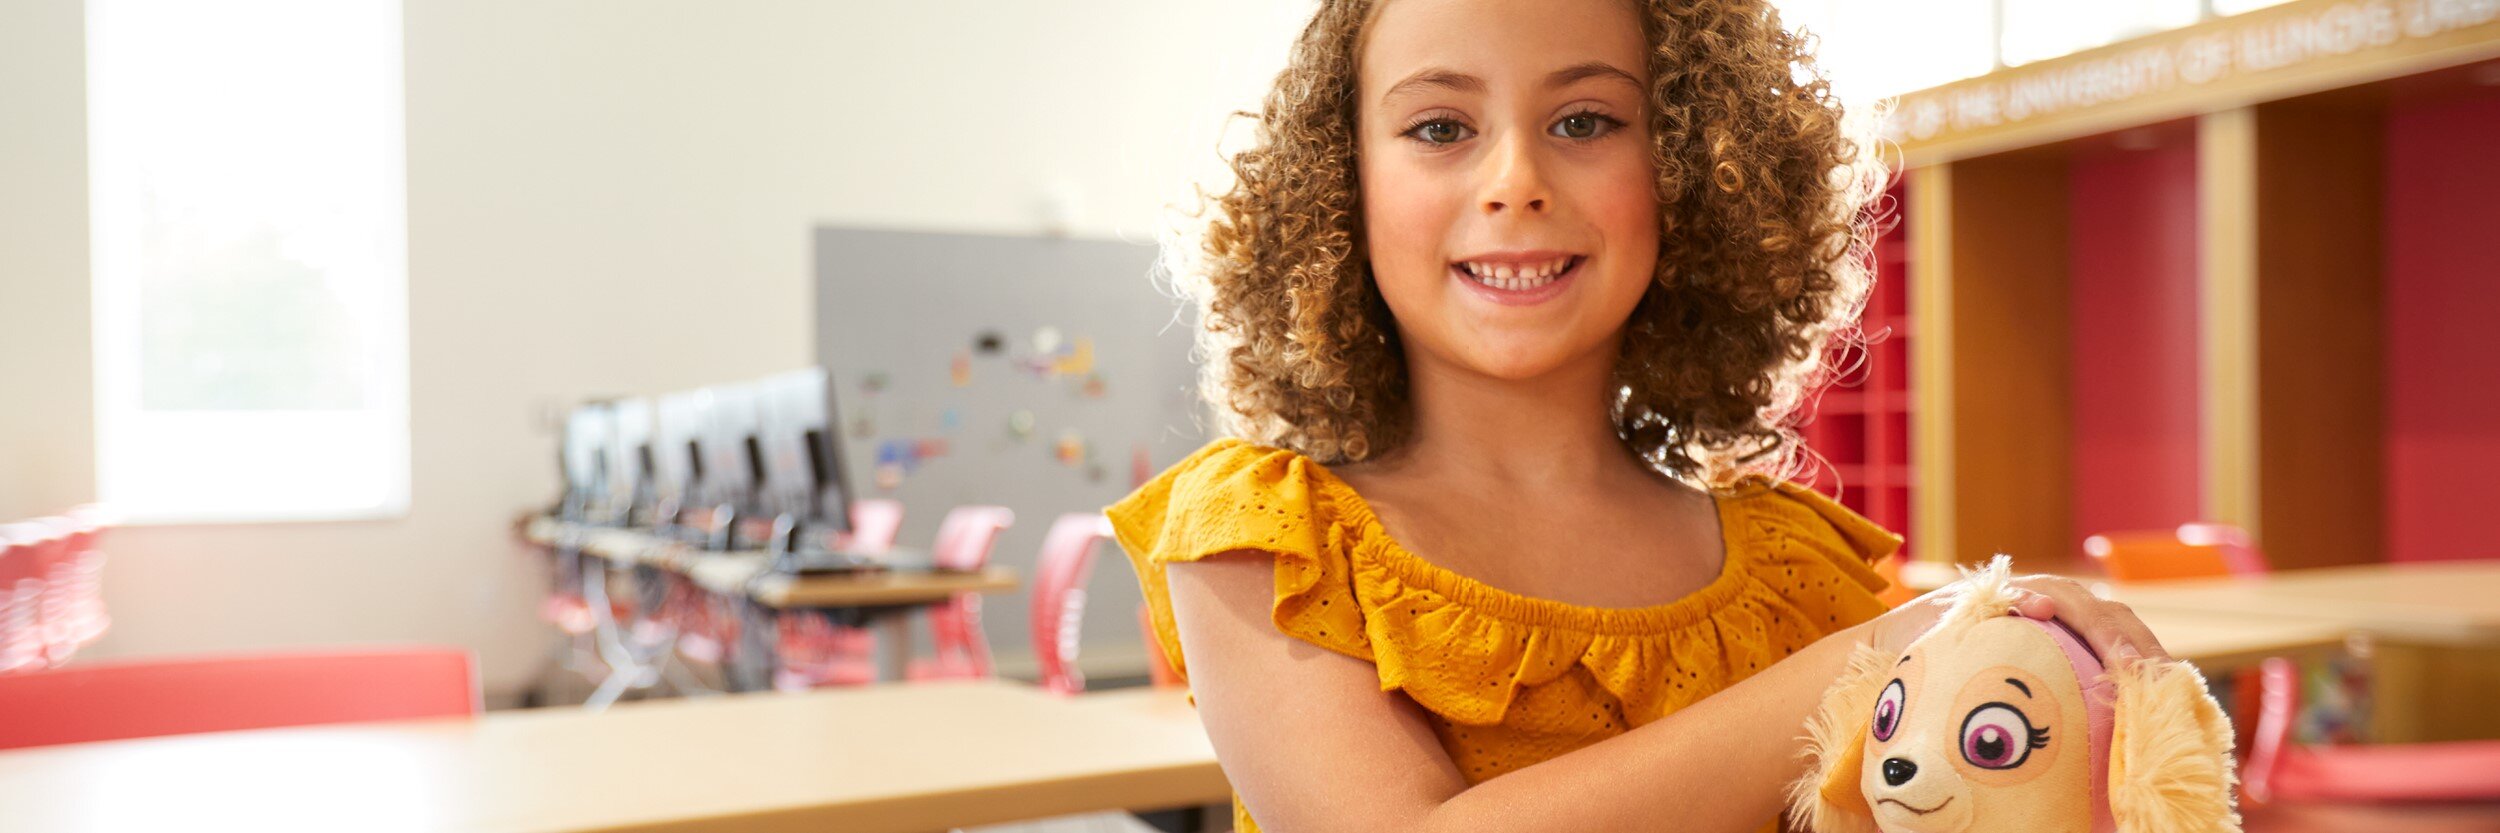 A young girl smiles as she holds a stuffed animal in a classroom.